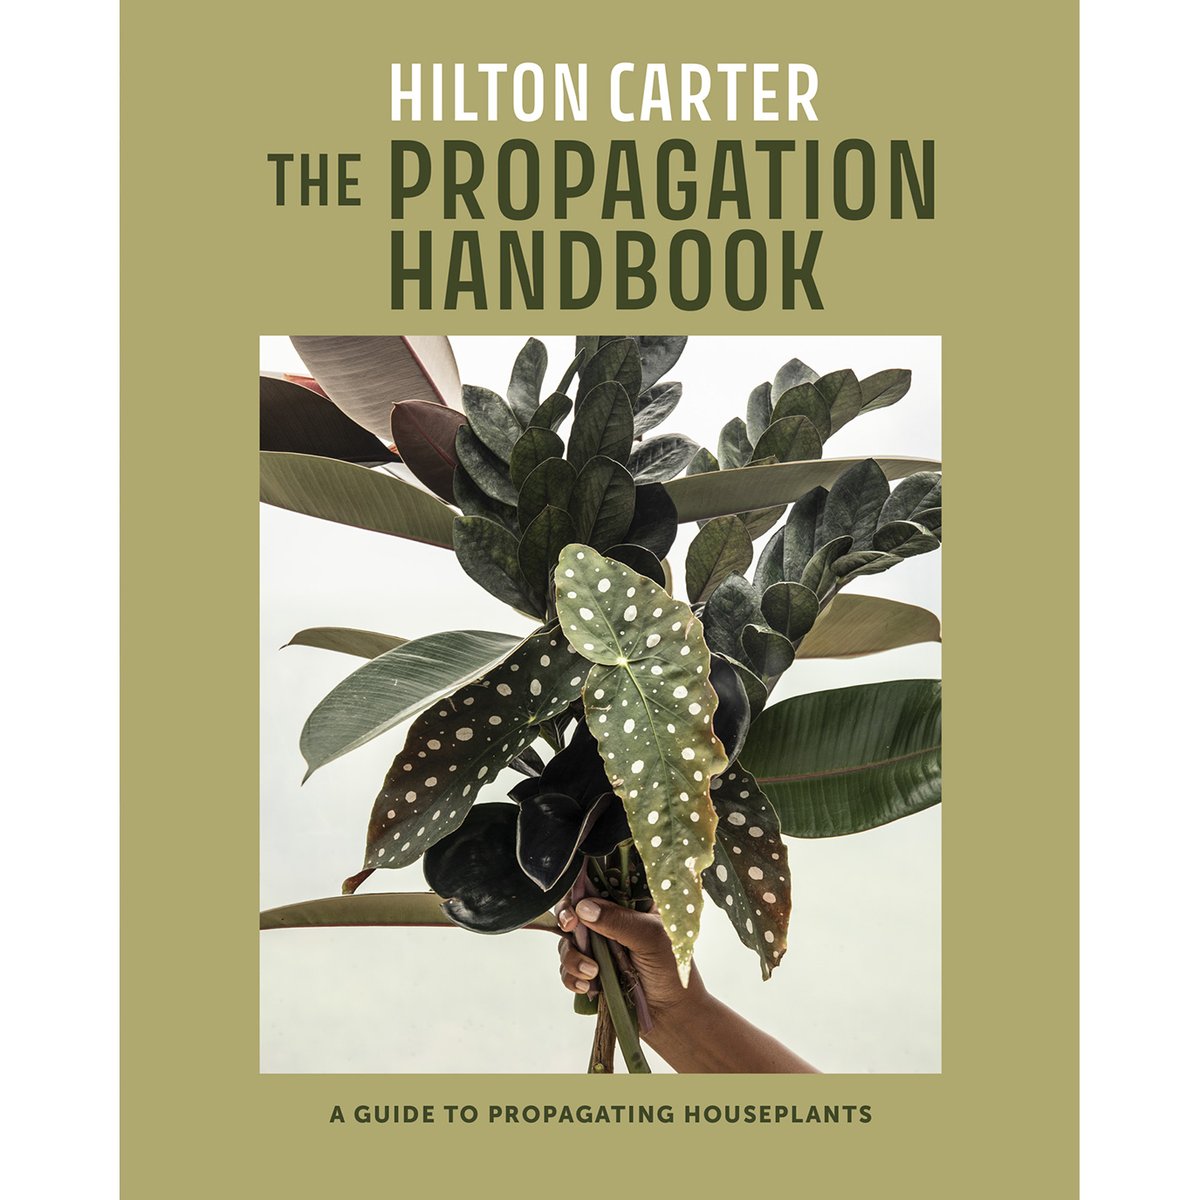 Join us for an evening of conversation and #plantpropagation demonstrations with best-selling author, artist, plant & interior stylist Hilton Carter! Tuesday, April 16, 5:30 - 7:00 pm. Books will be available for purchase. Tix: $35/$30 Member- ow.ly/qiwm50R6UYQ